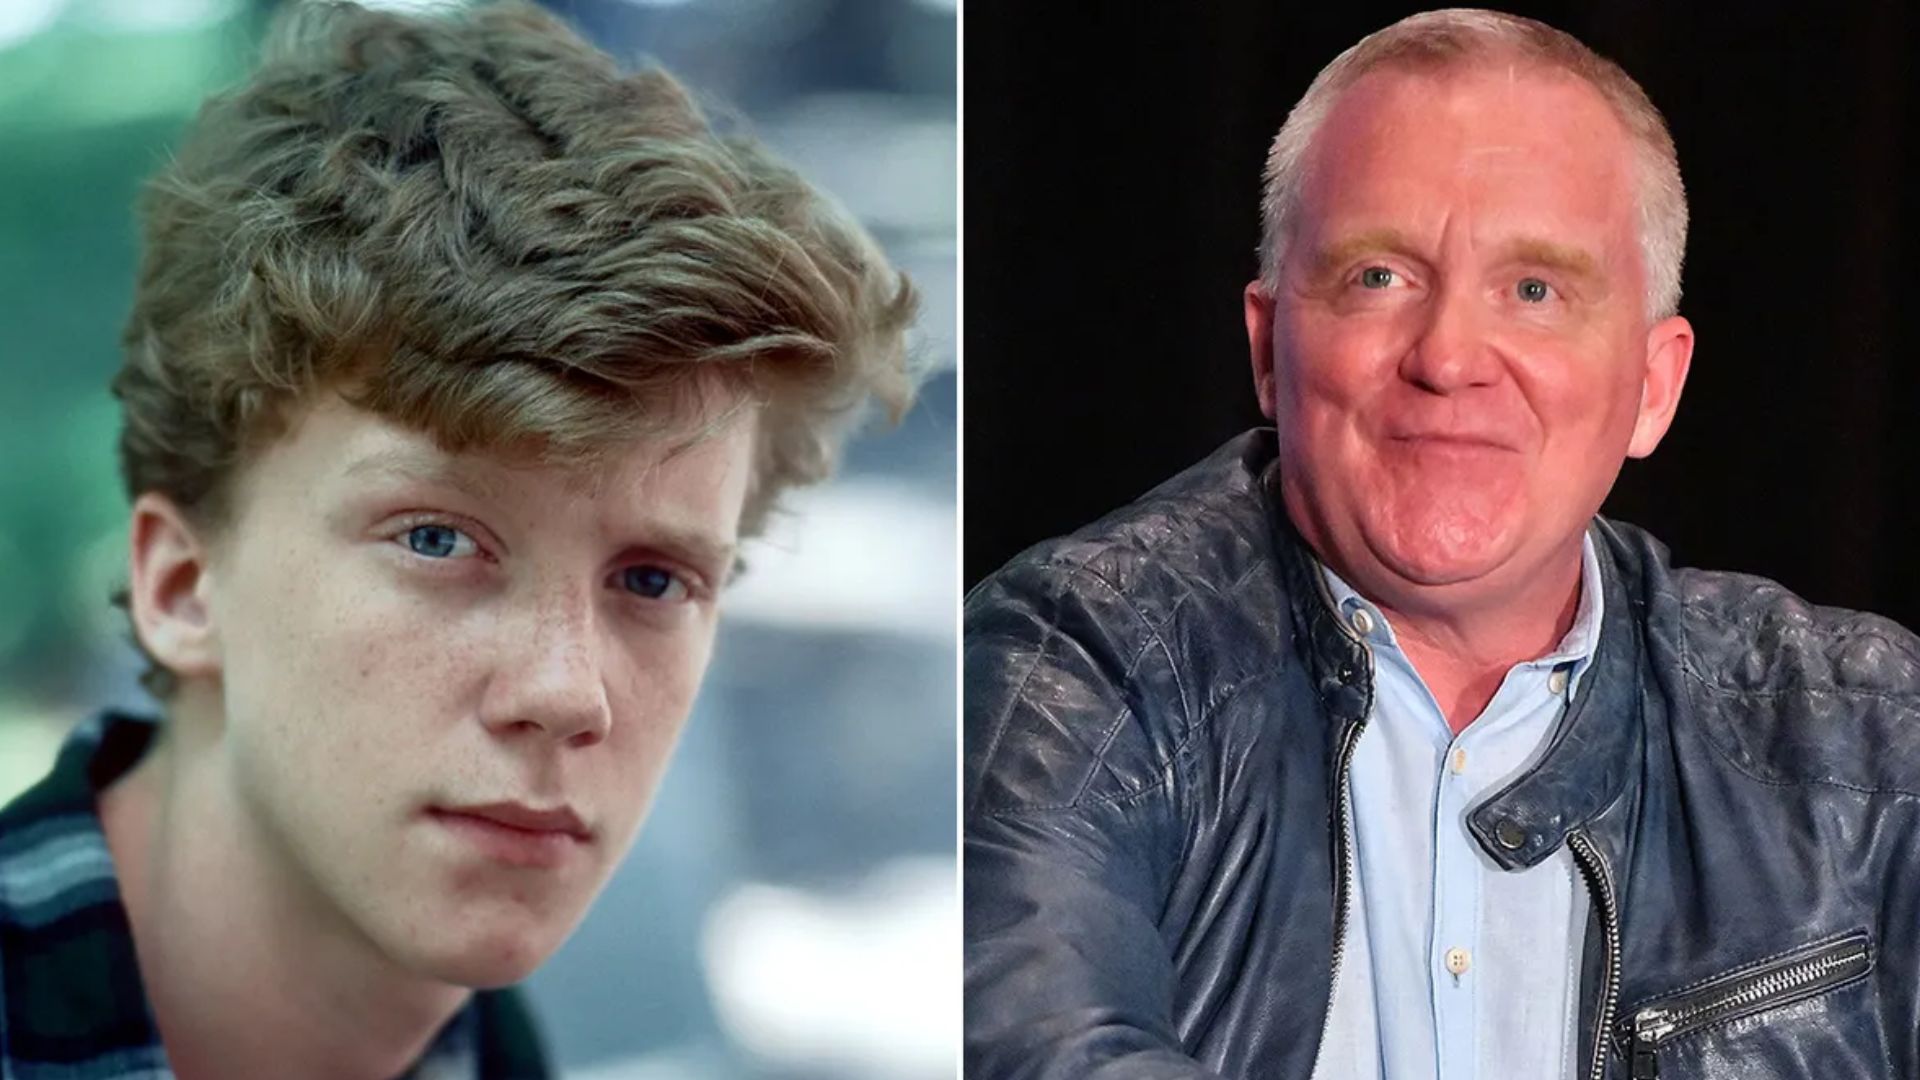 Anthony Michael Hall In Young Age And OId Age